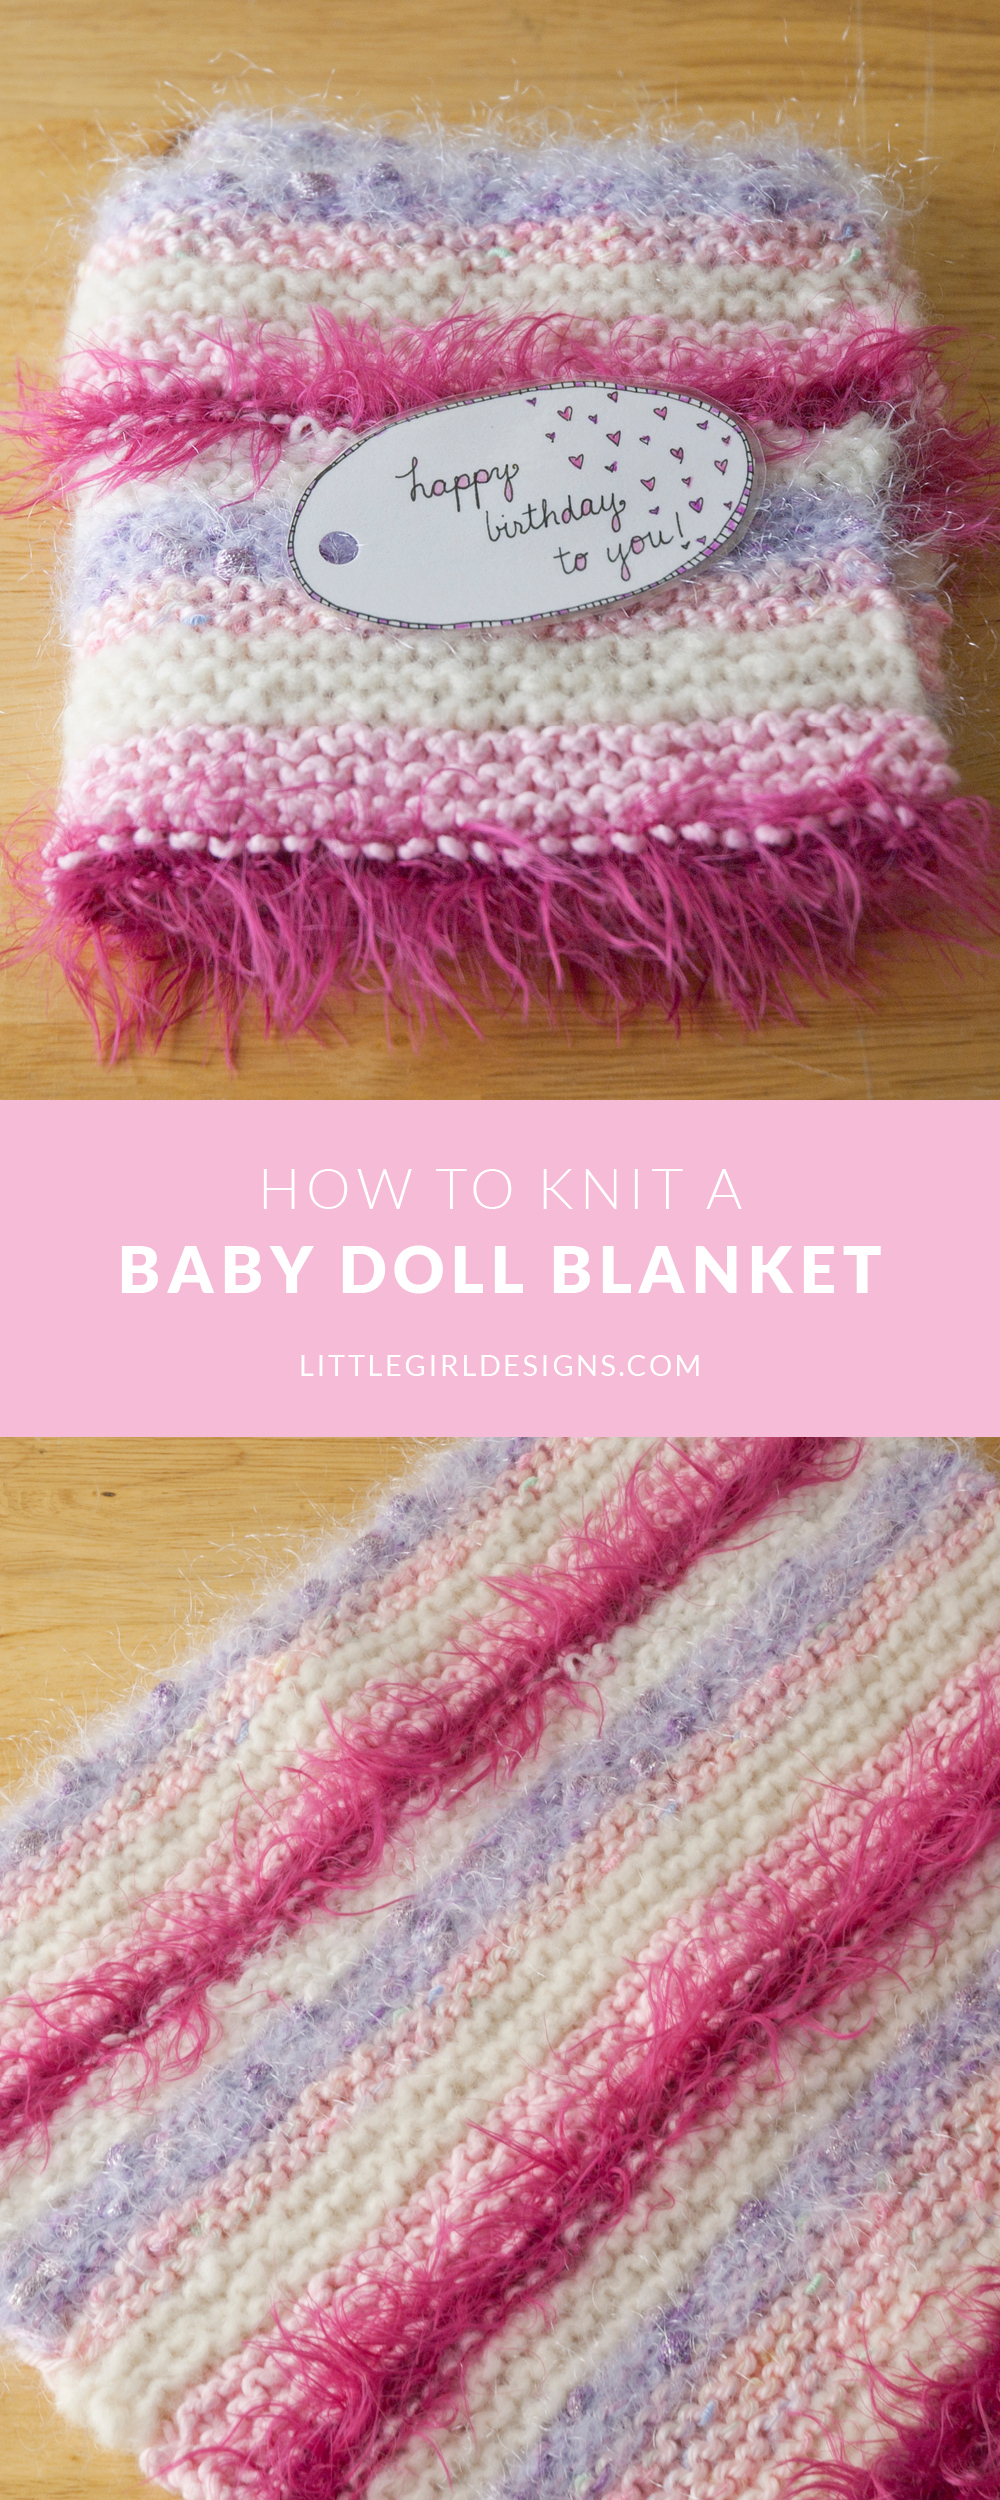 A Baby Doll Blanket